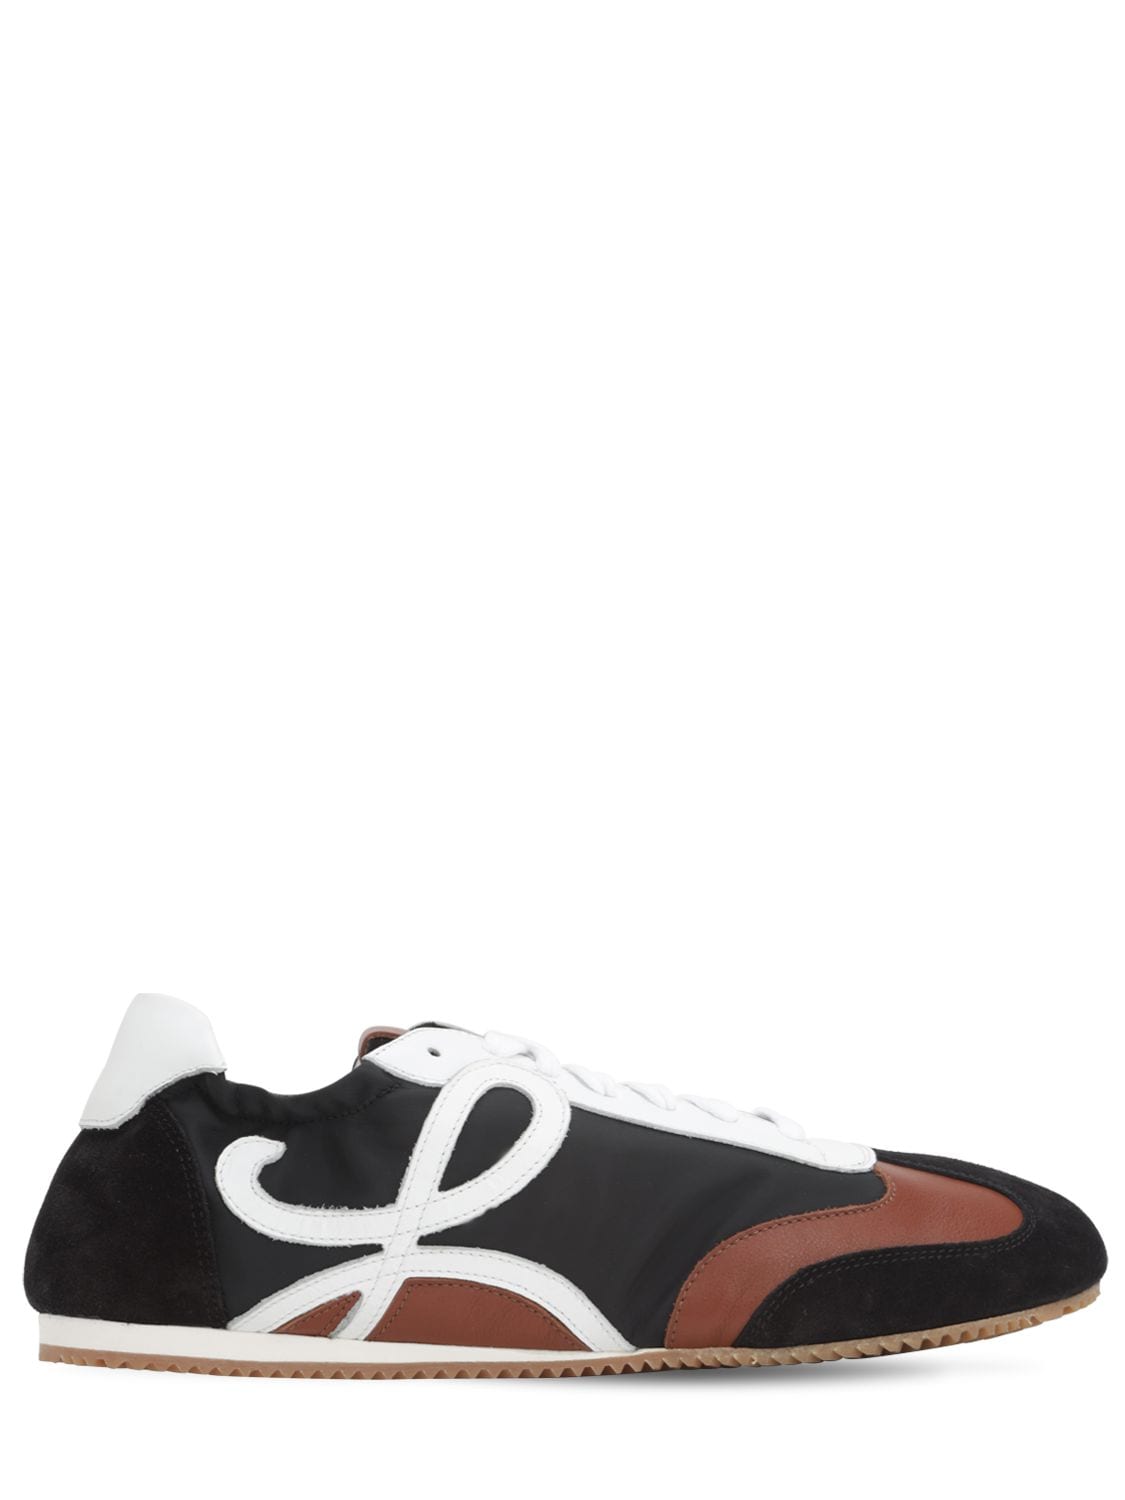 LOEWE ANAGRAM LEATHER & NYLON LOW TOP trainers,71I4PR002-ODKXNG2